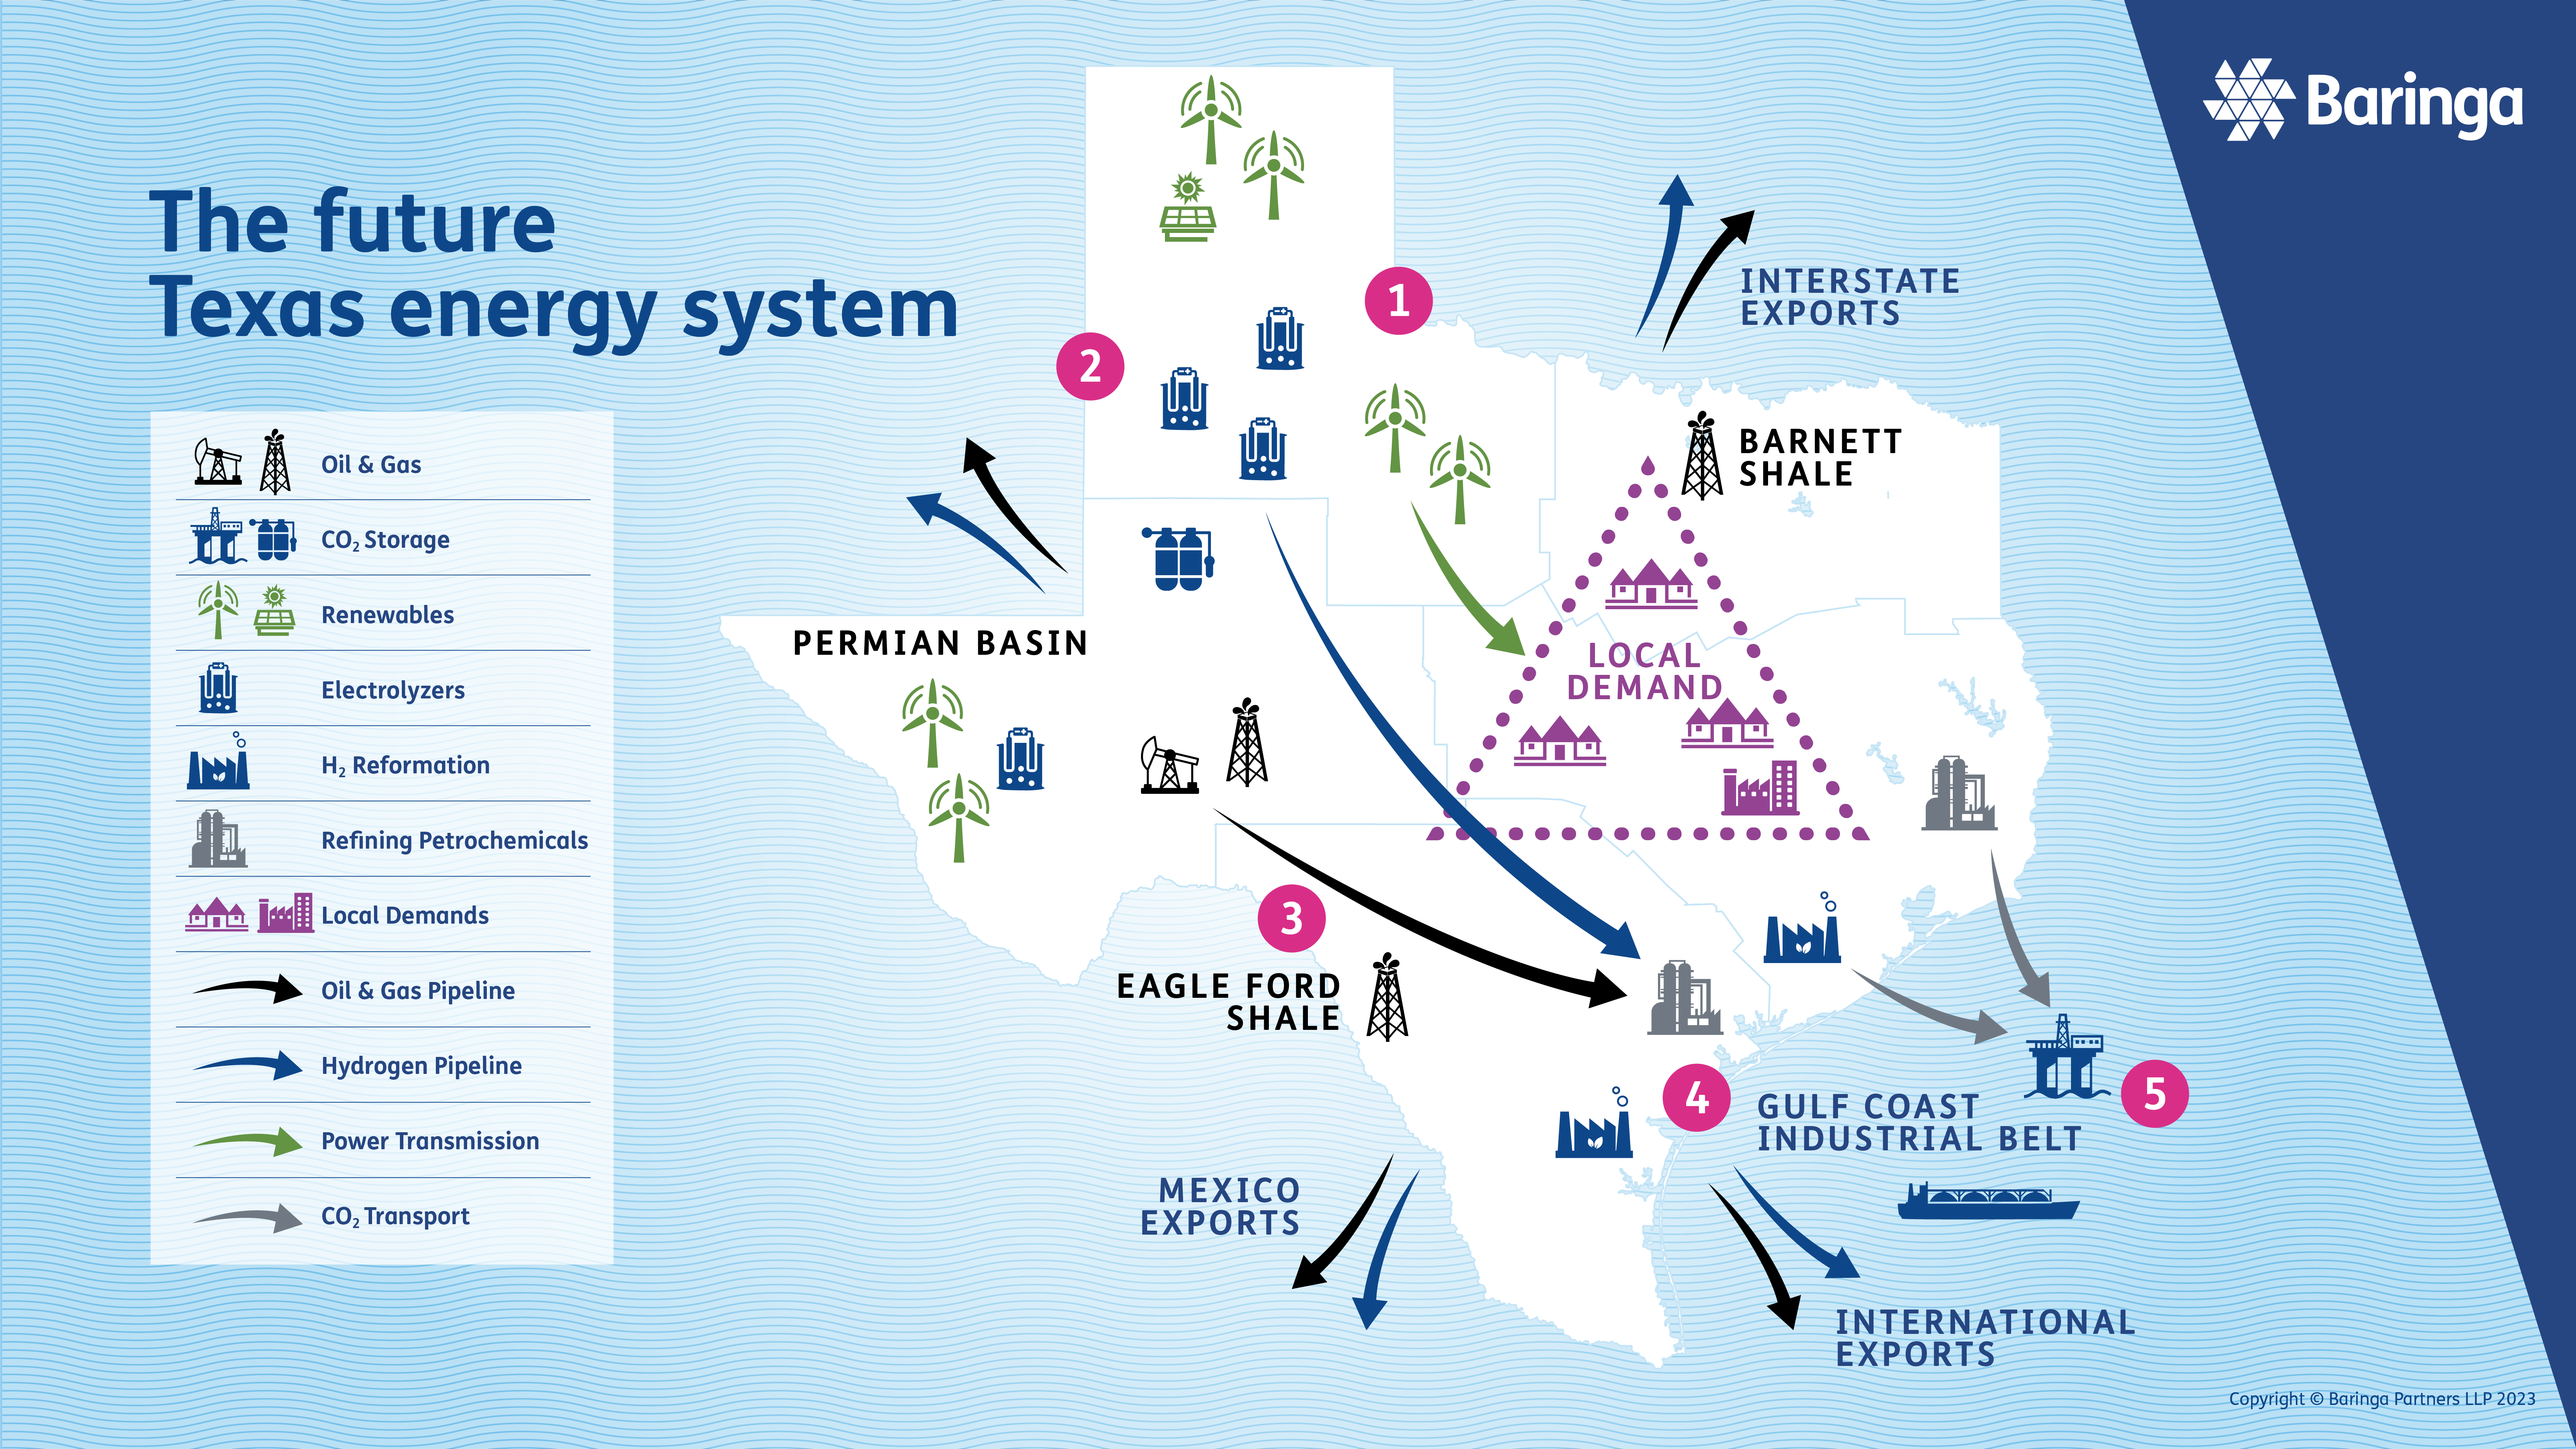 The future Texas energy system